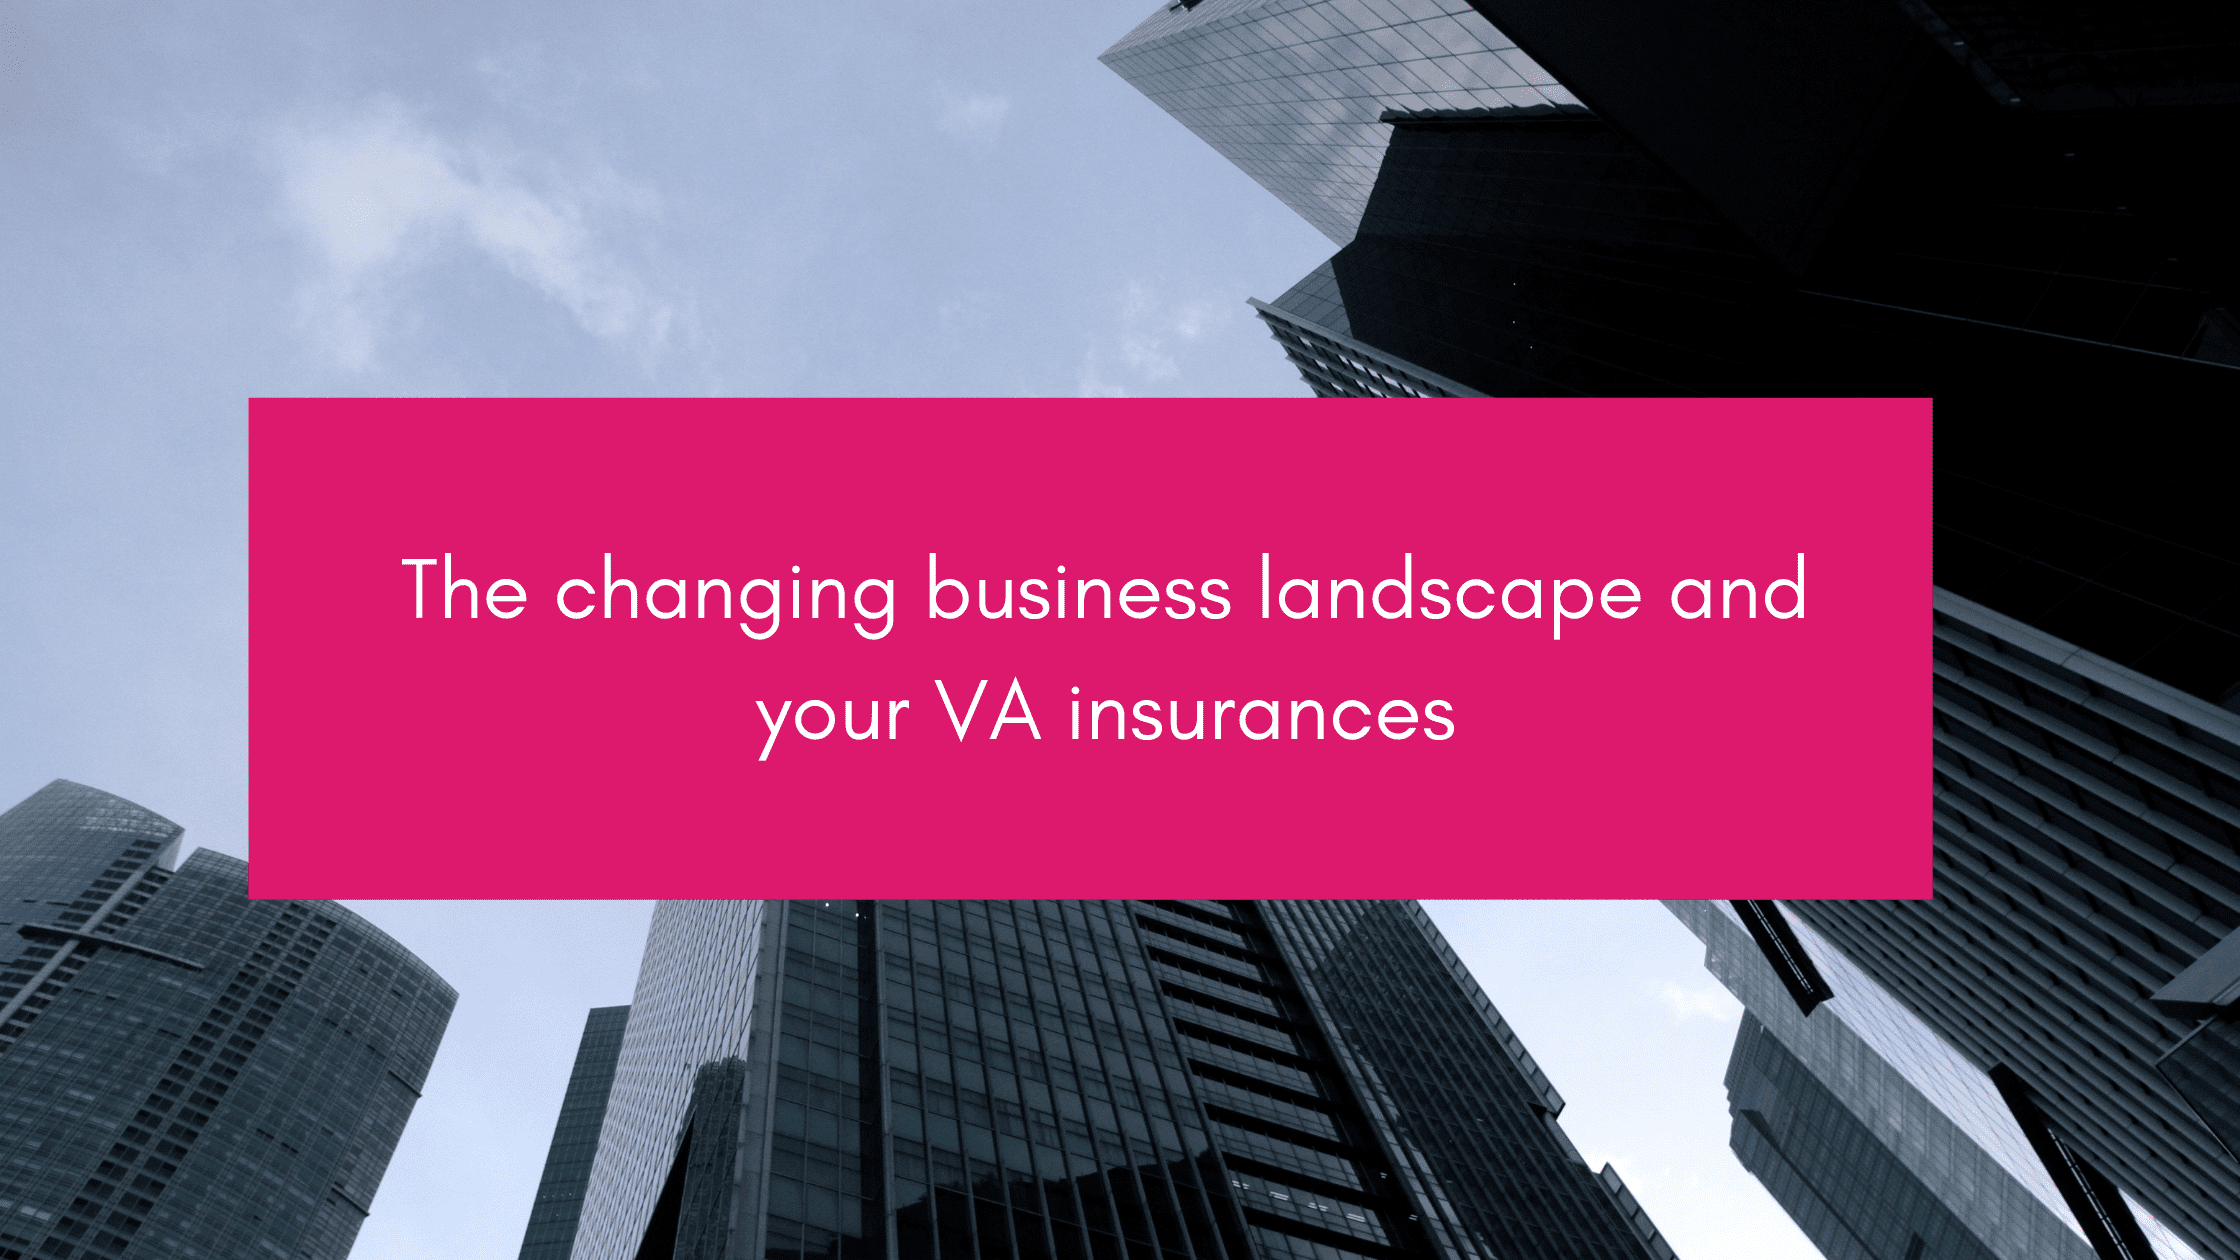 The changing business landscape and your VA insurances